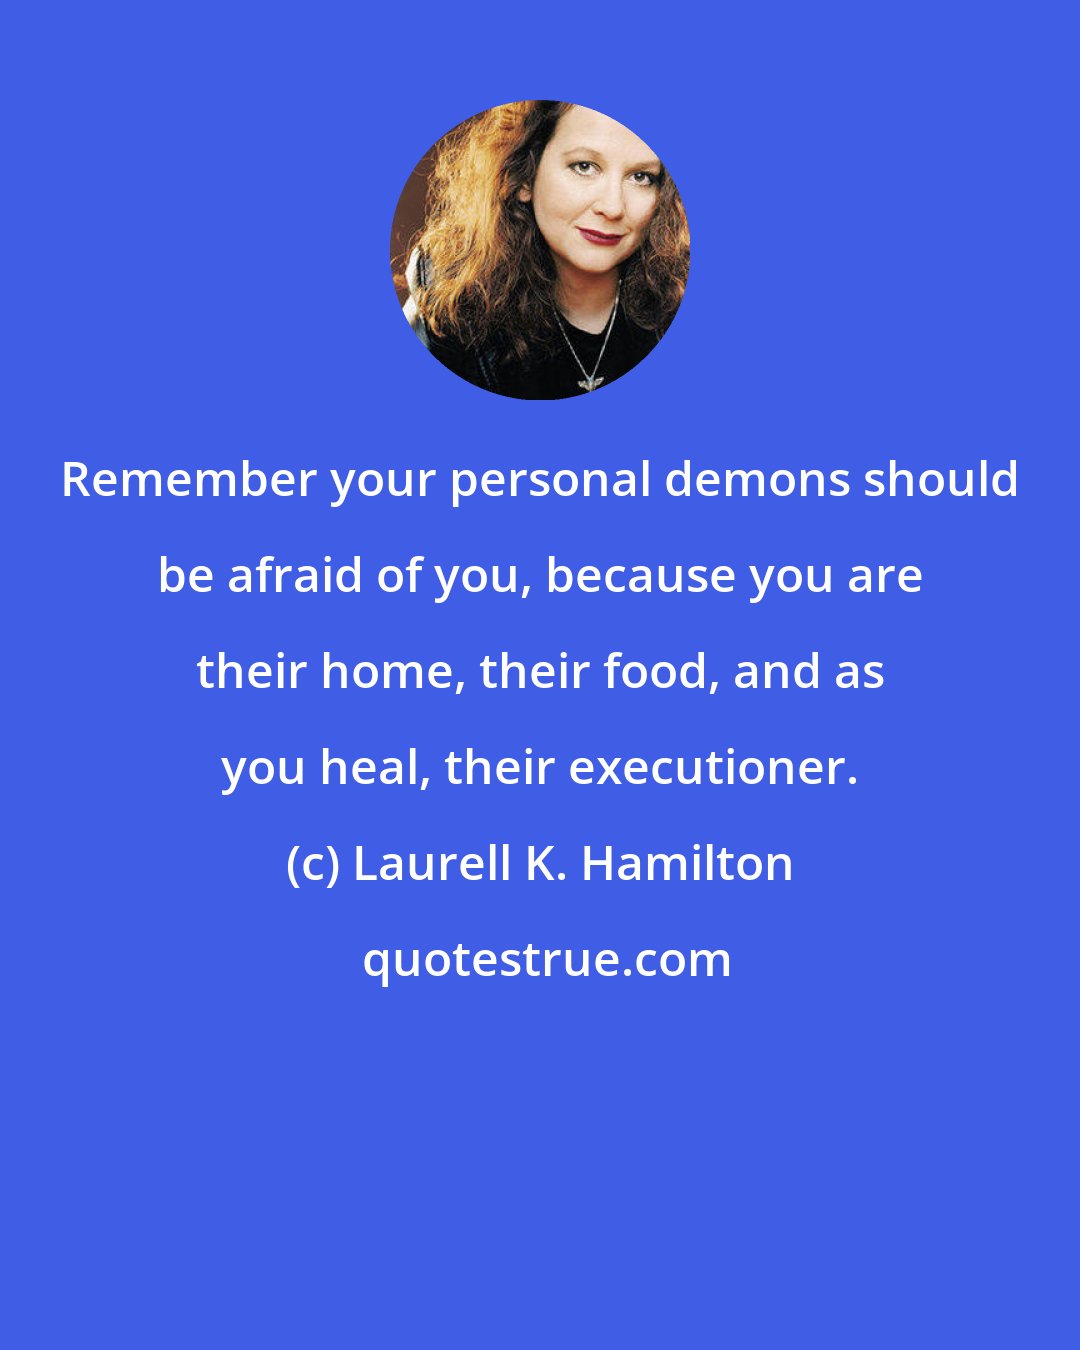 Laurell K. Hamilton: Remember your personal demons should be afraid of you, because you are their home, their food, and as you heal, their executioner.